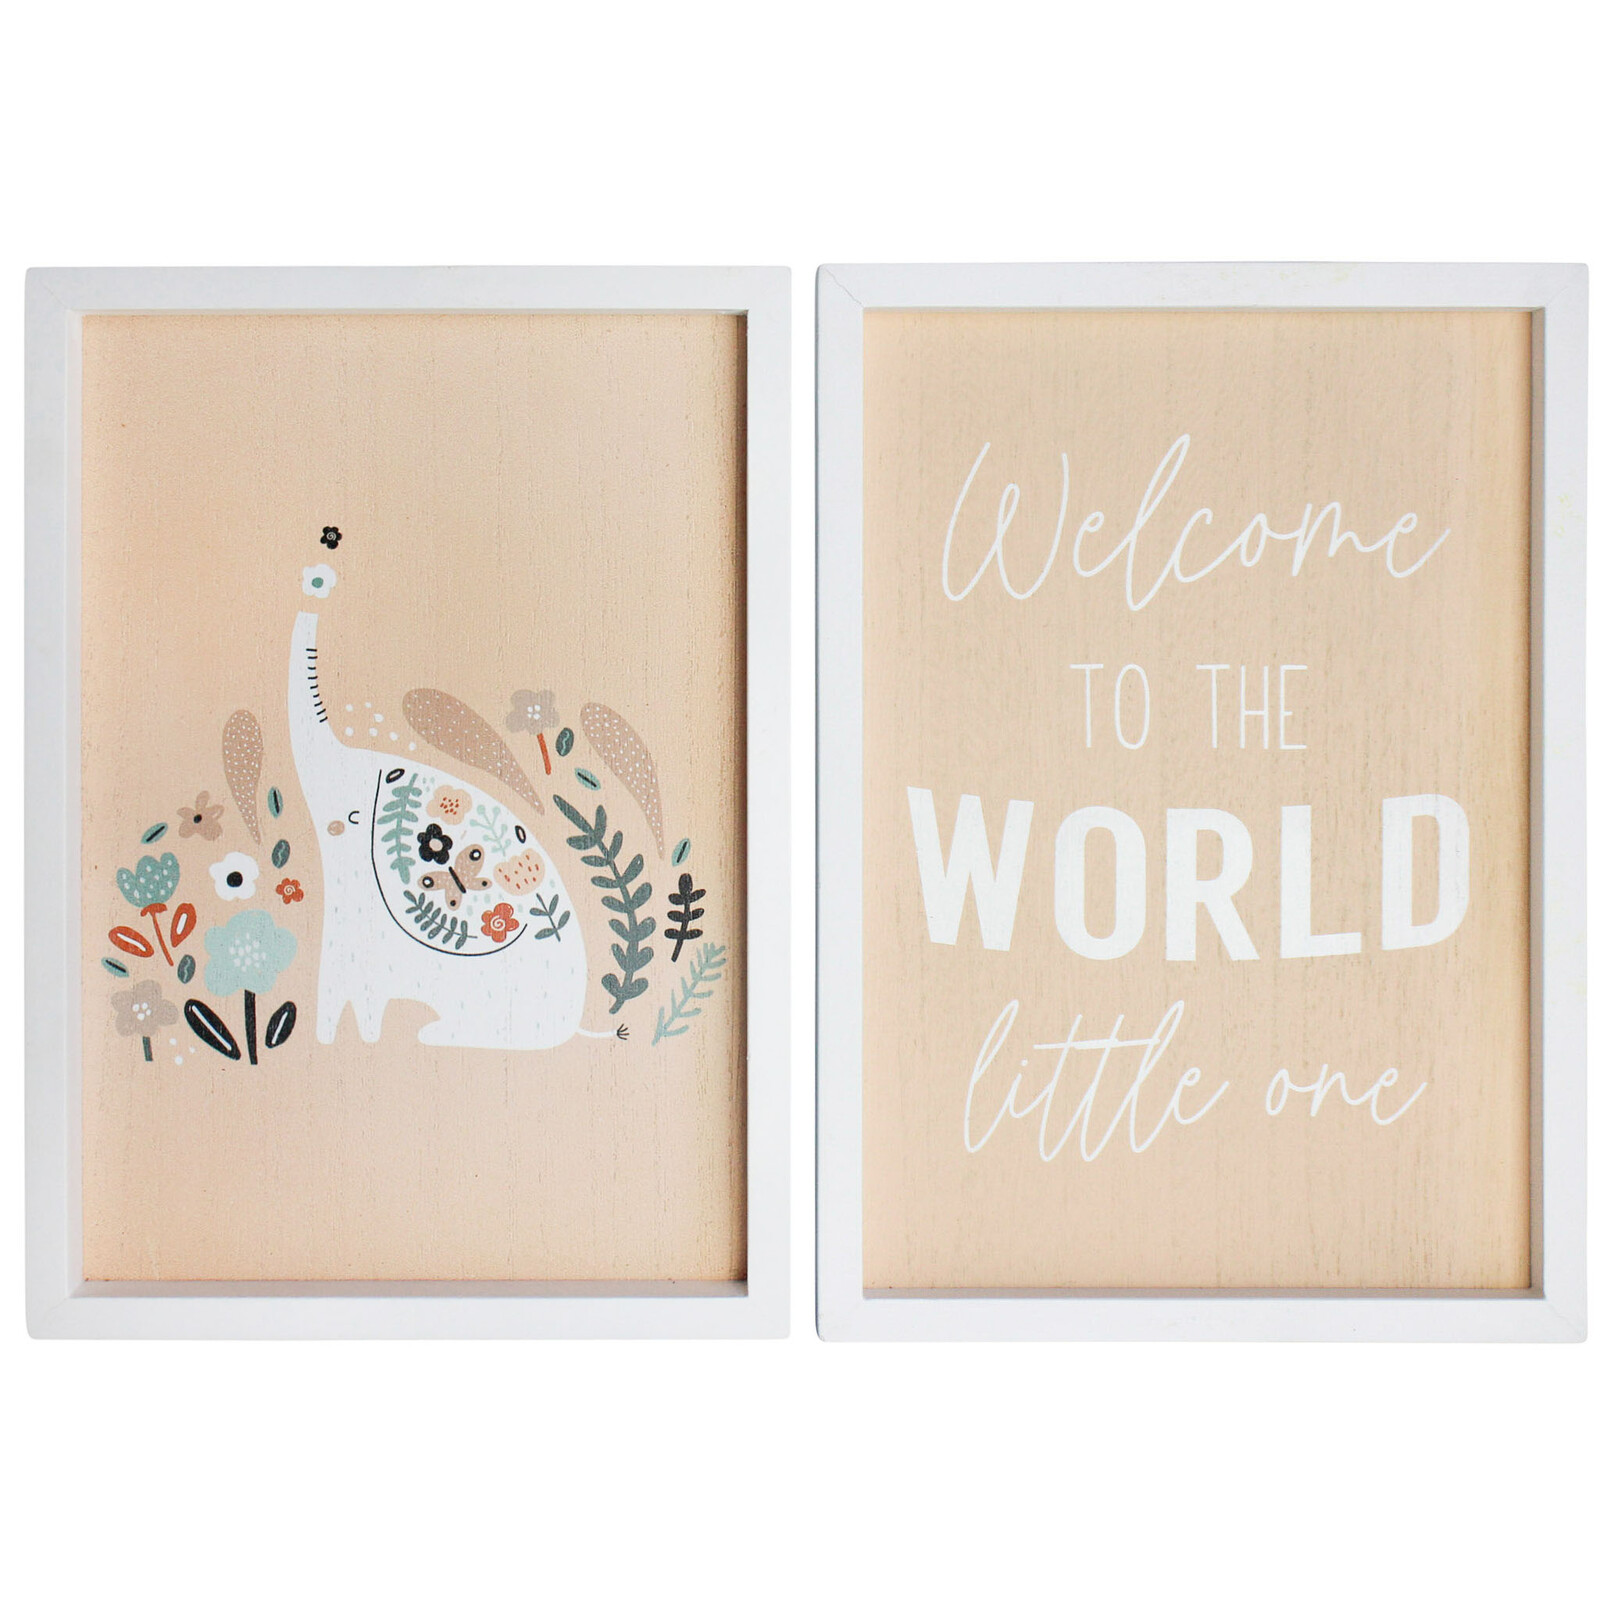 Sign S/2 Welcome World Little One